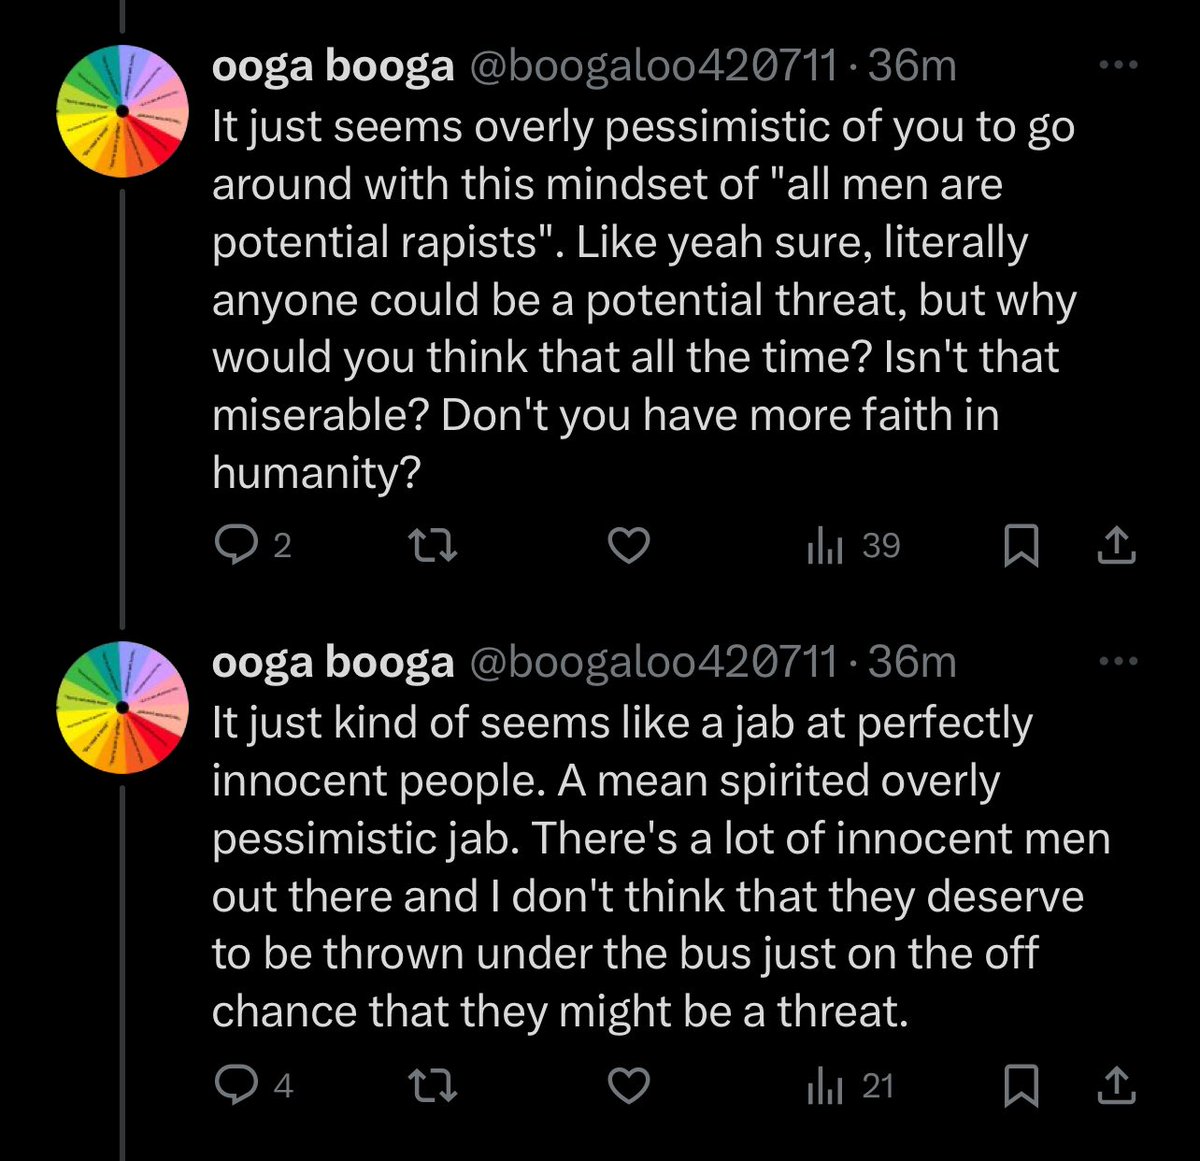 I am so deeply, incredibly tired of men who think women are “mean spirited” for worrying about rape, and who take our desire for safety as a personal attack. This man thinks that women are “throwing men under the bus” if we’re even wary of strange men. In his mind, it’s more…